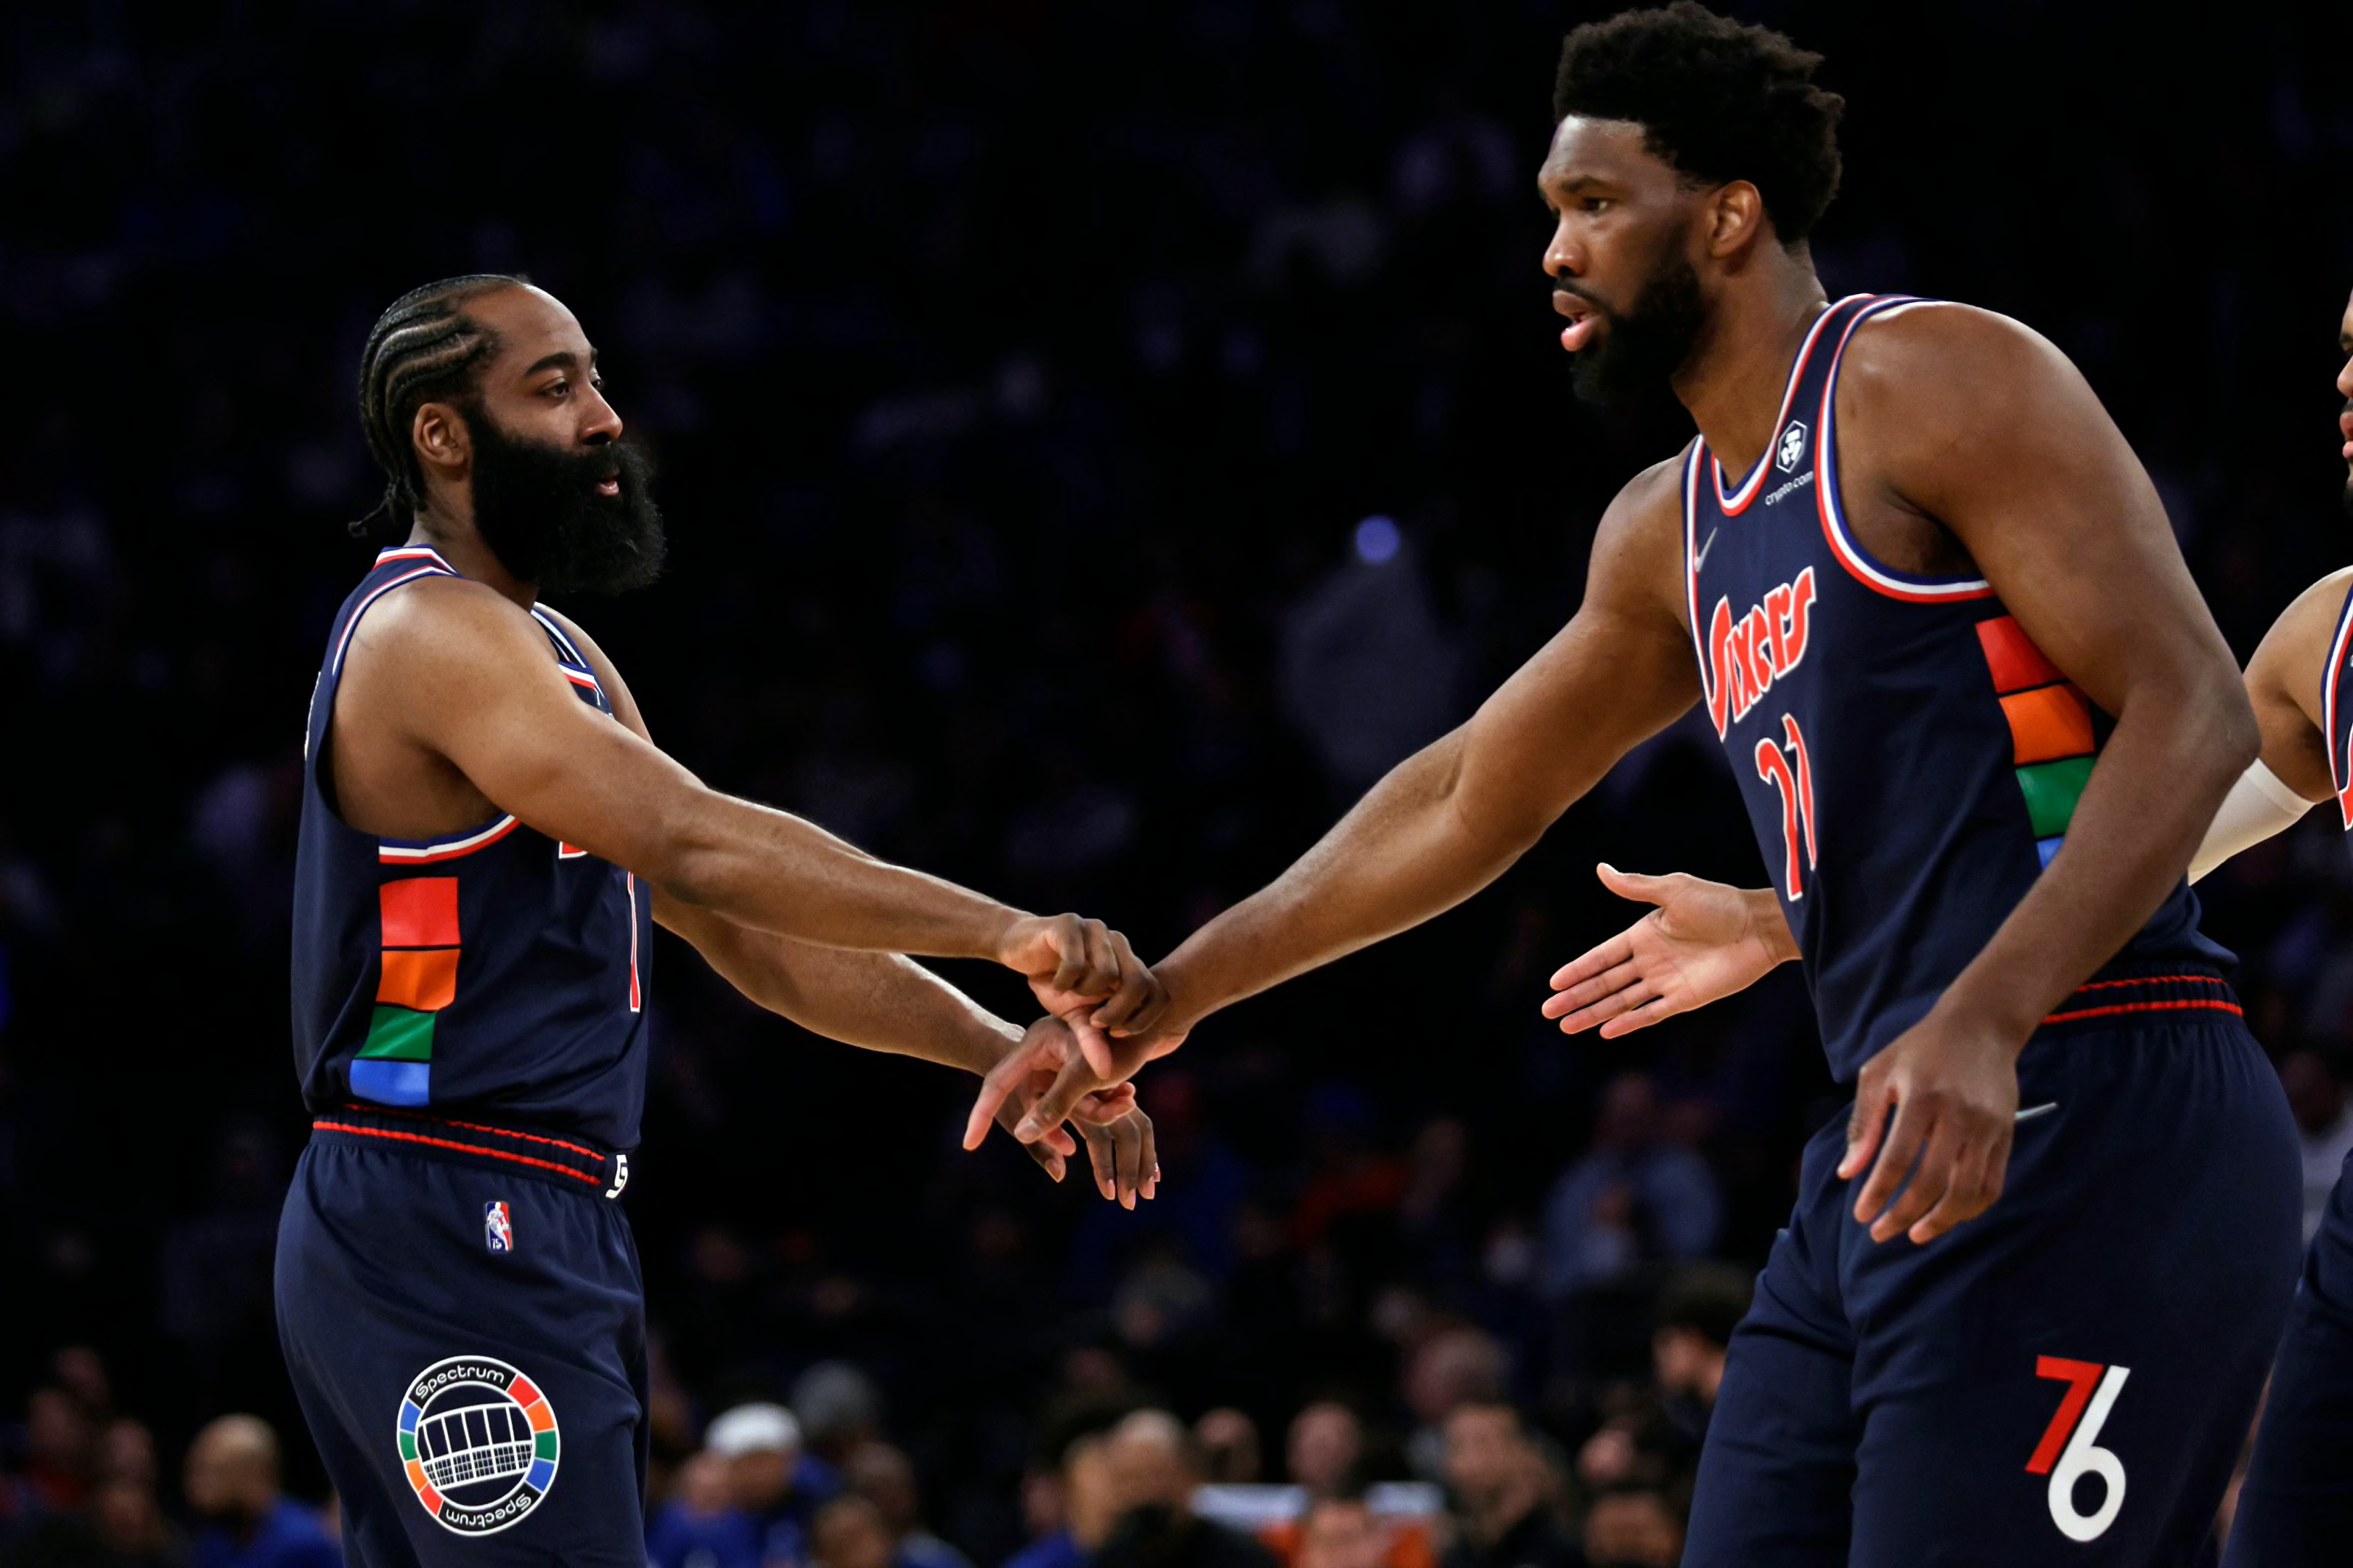 Joel Embiid says he and James Harden are "unstoppable"